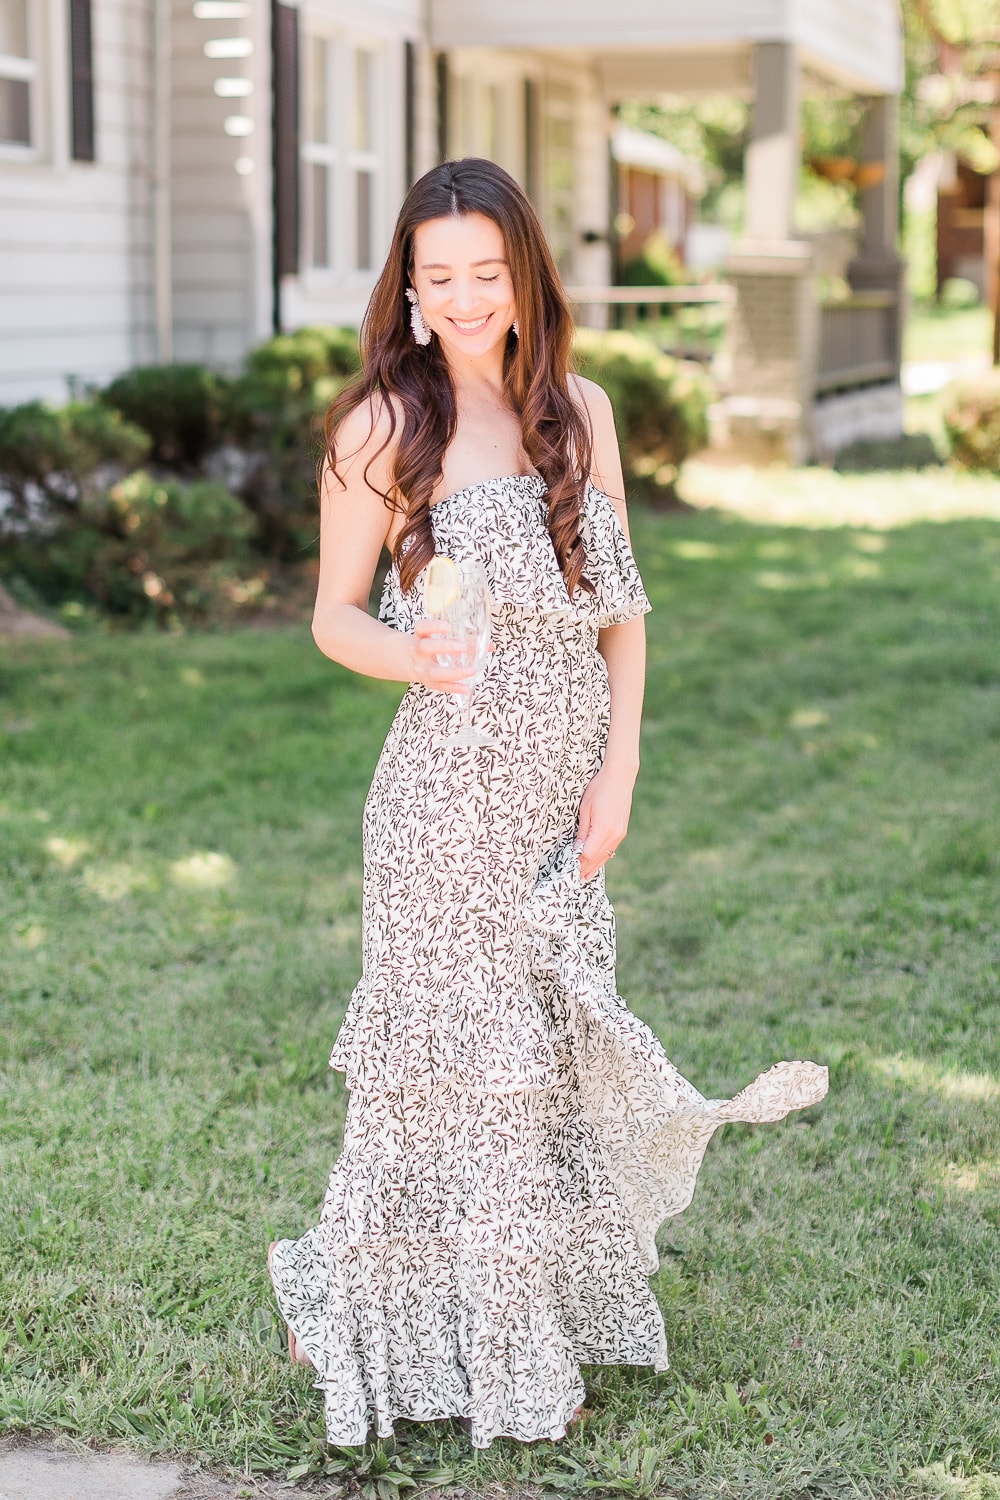 Strapless green ruffle maxi dress styled with nude sandals and white beaded statement earrings by affordable fashion blogger Stephanie Ziajka on Diary of a Debutante